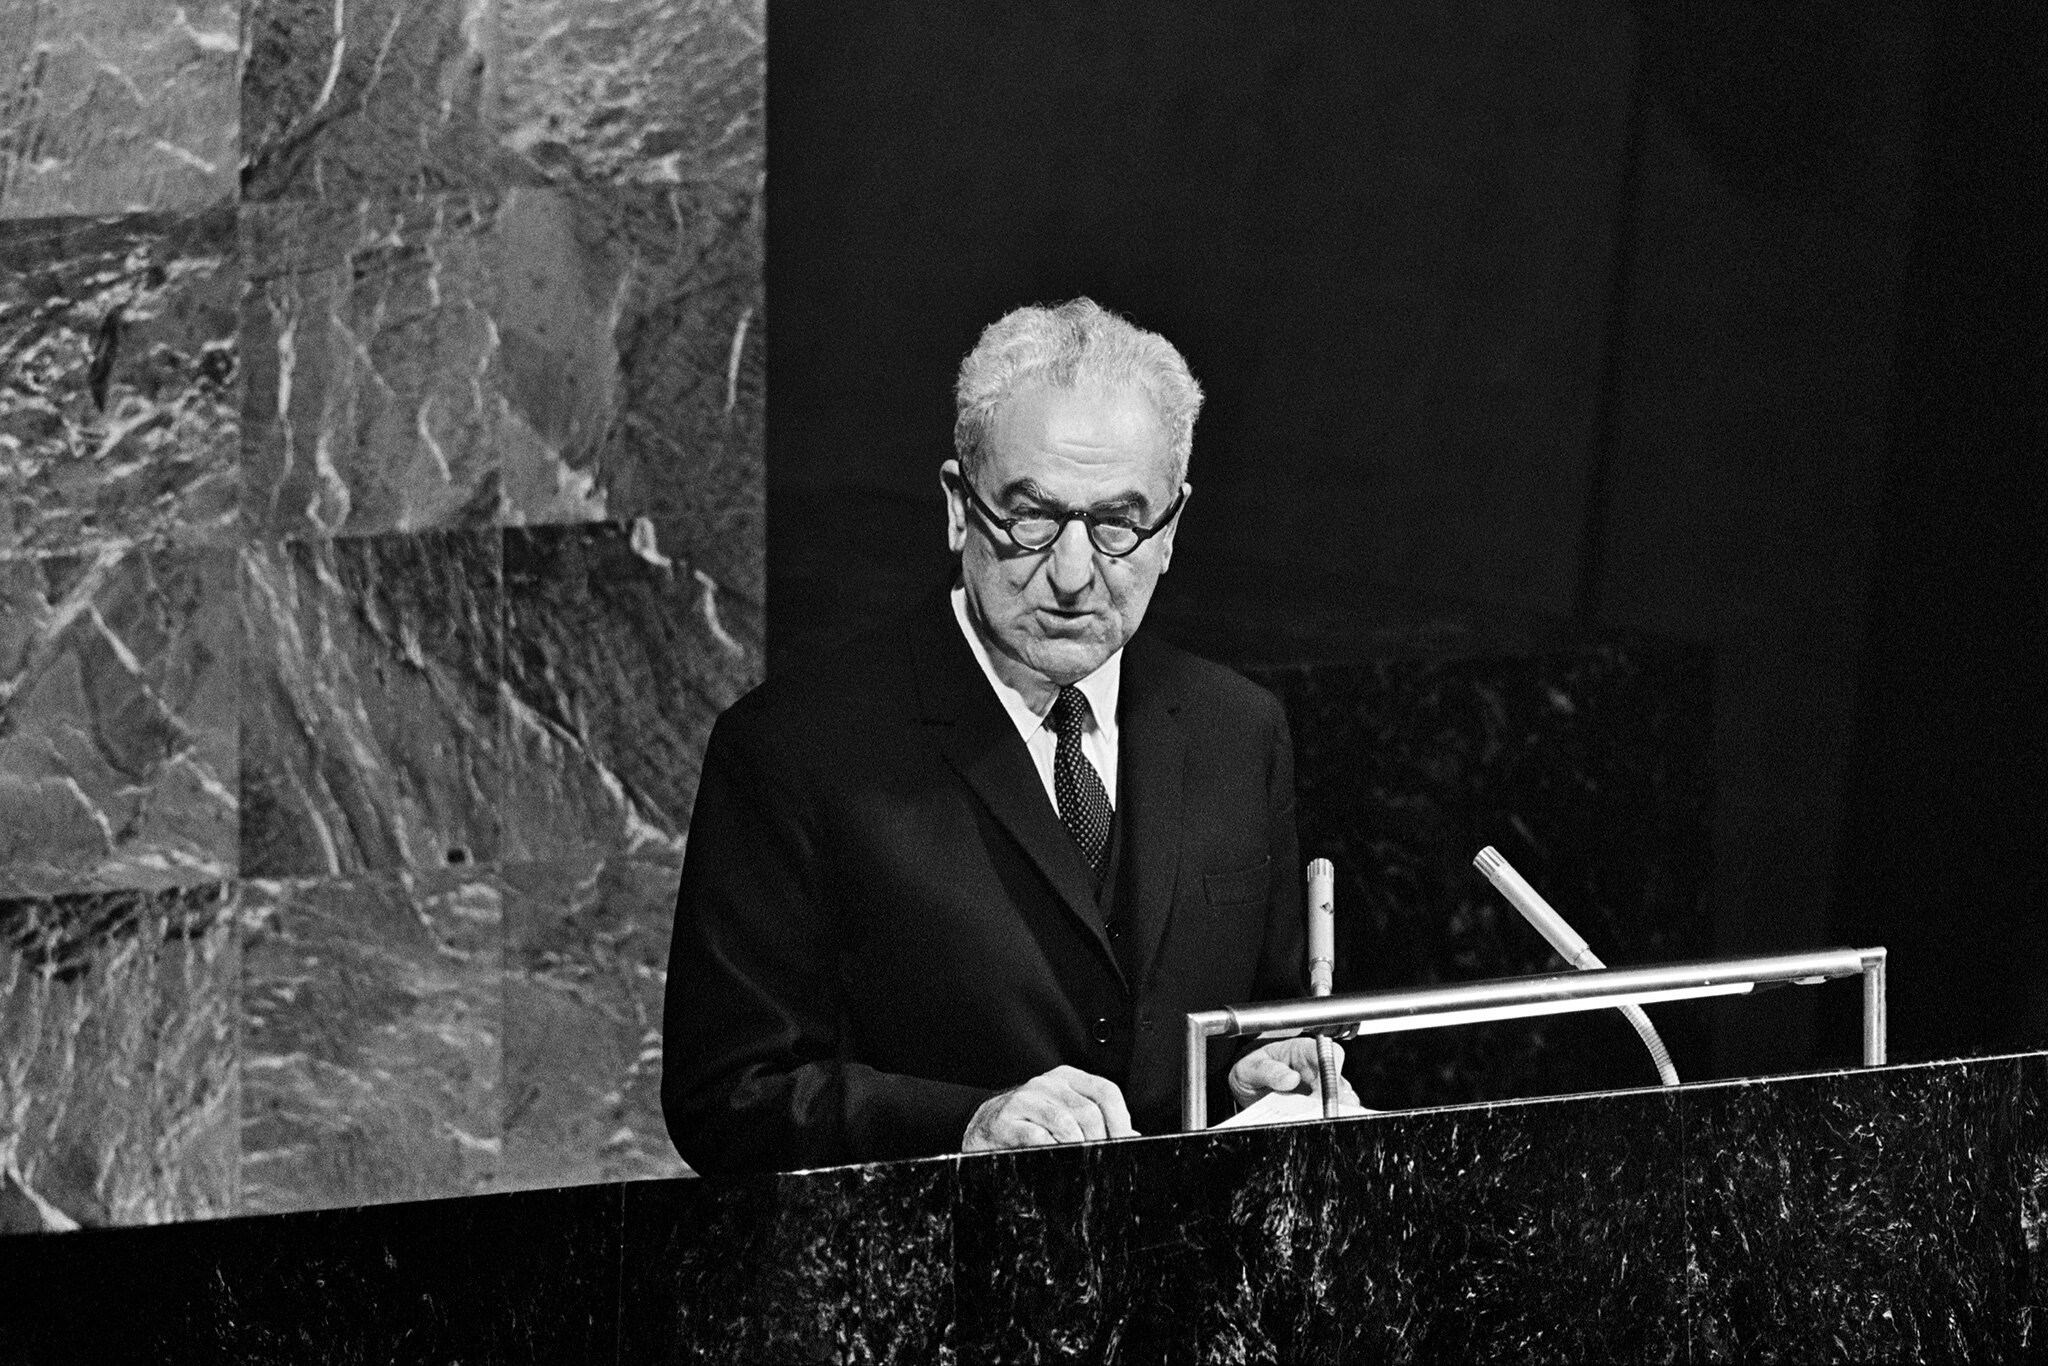 Charles Malik addresses the UN General Assembly in 1968